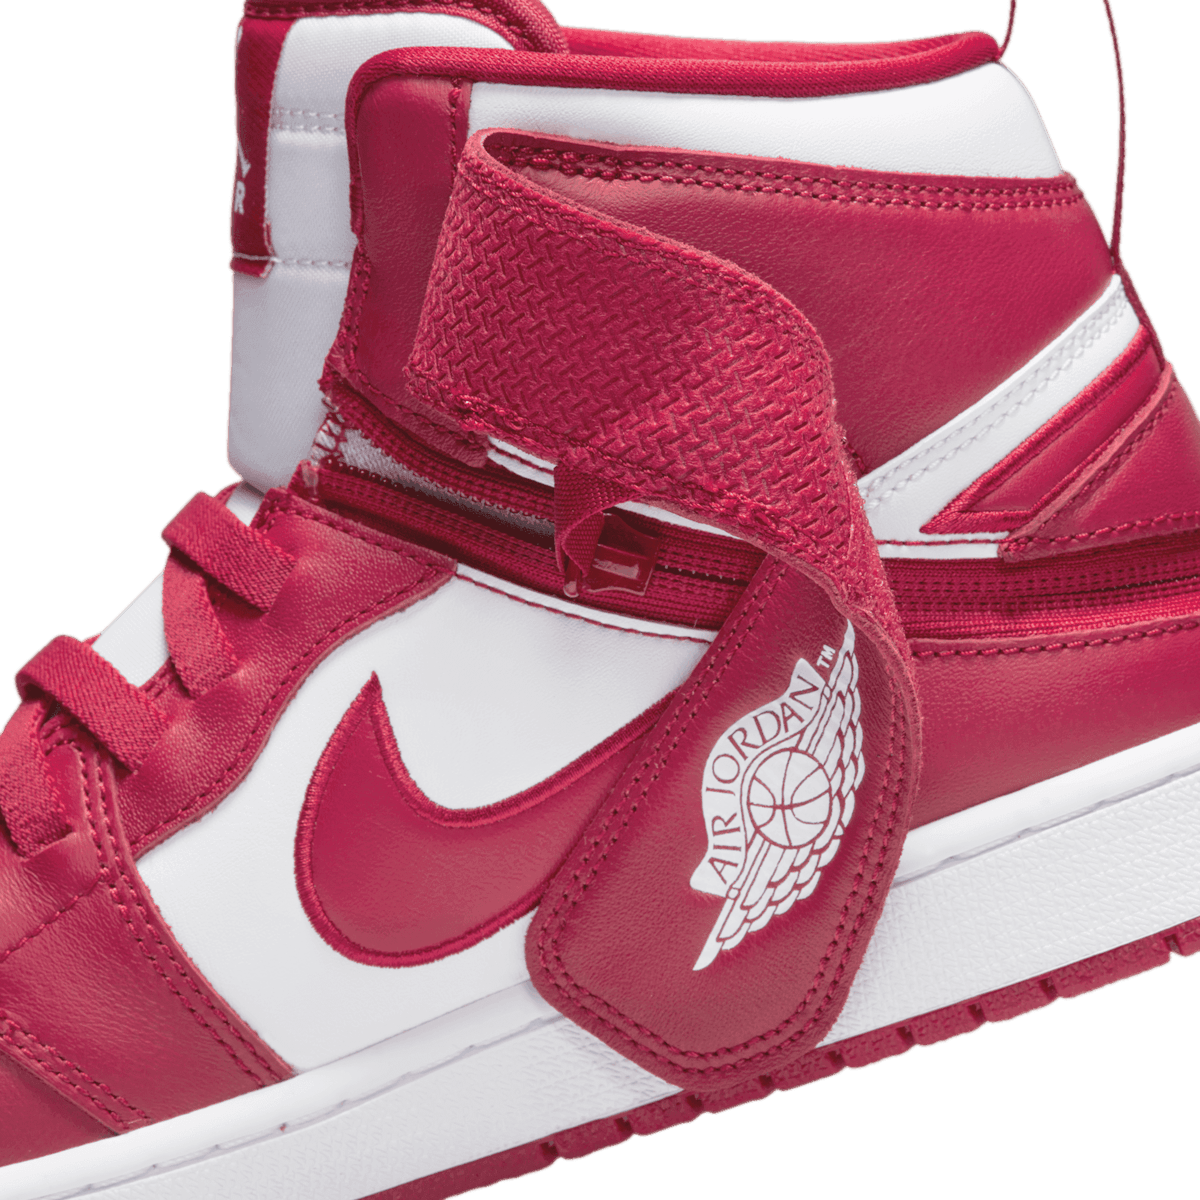 Jordan 1 Flyease Red and White Angle 8